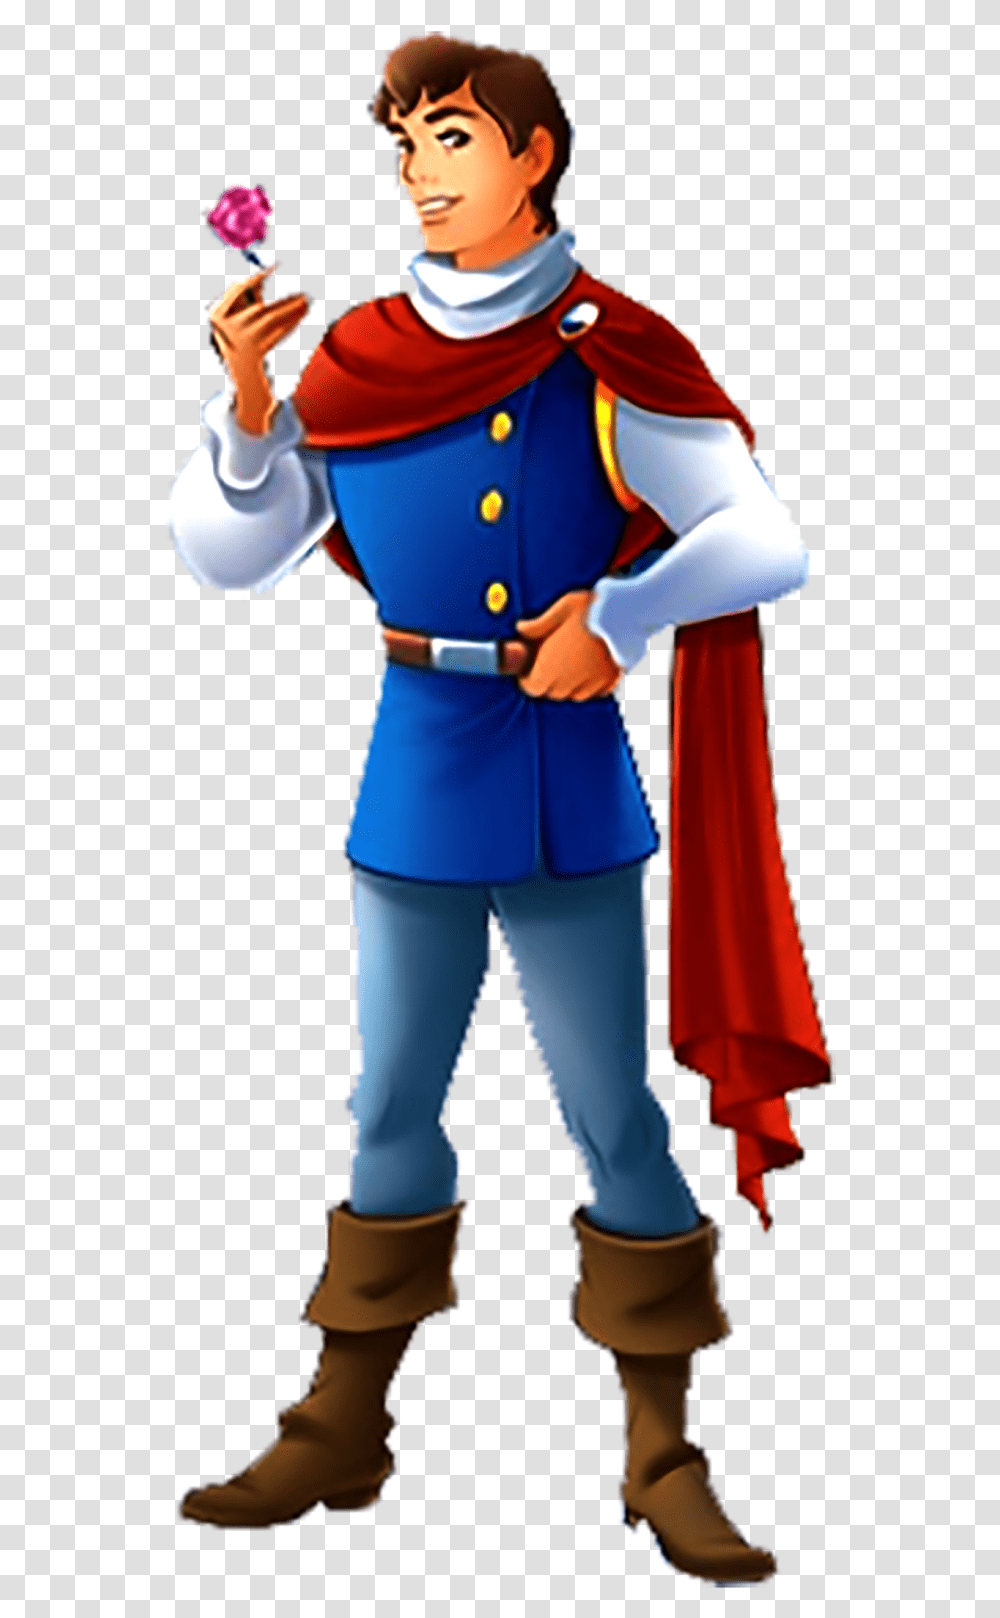 Prince Charming Snow White And The Seven Dwarfs Disney Prince Charming Snow White, Costume, Person, Cape Transparent Png